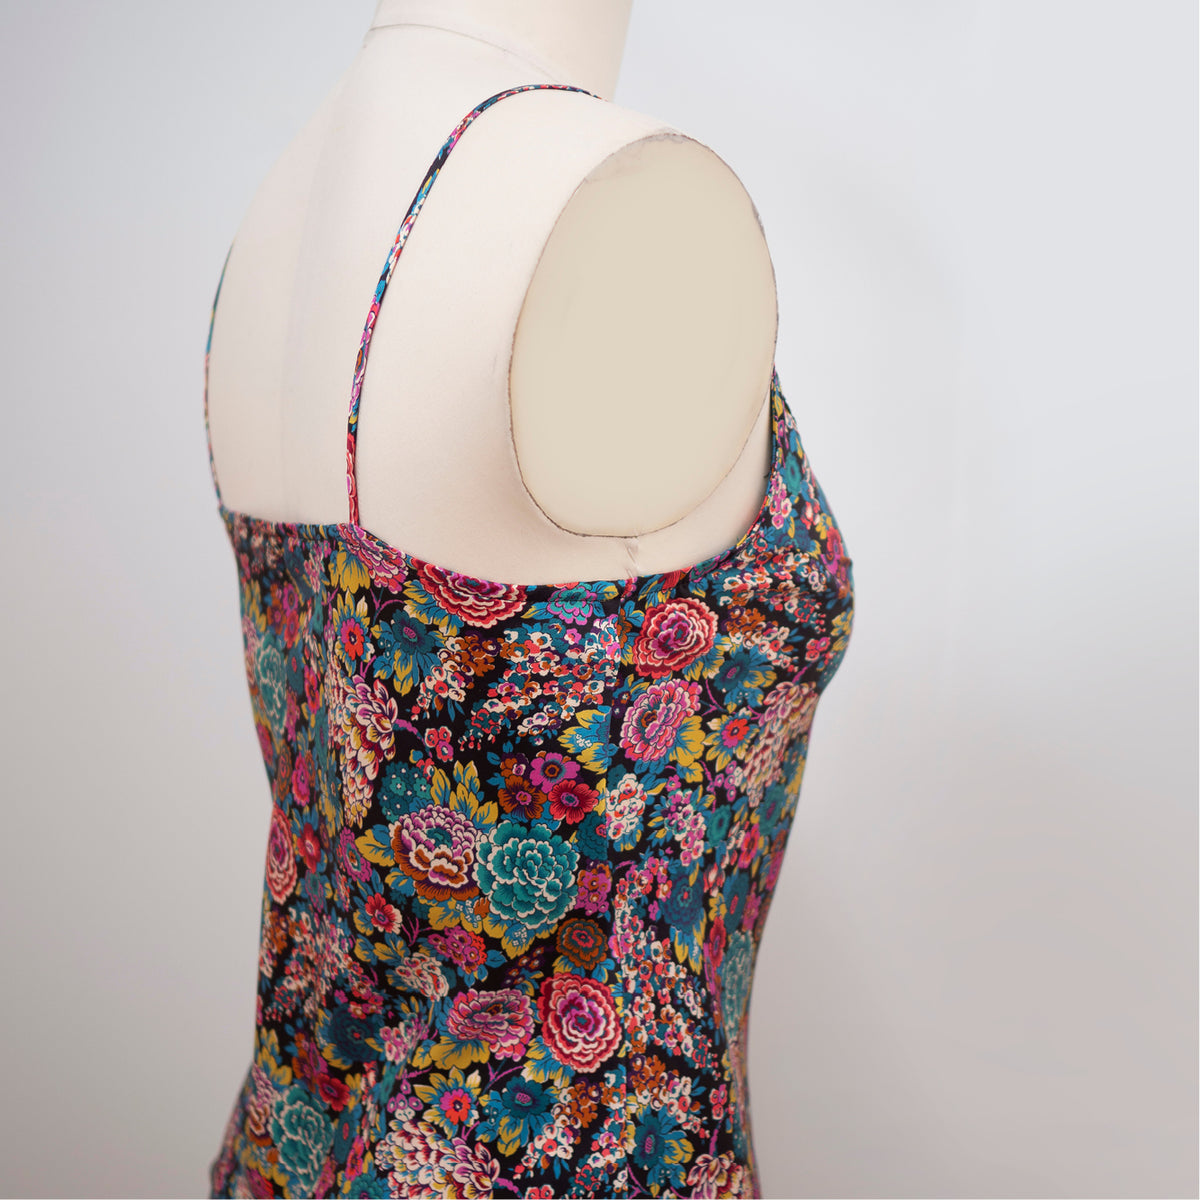 Sommar Camisole PDF Sewing Pattern With Built in Bralette. Low